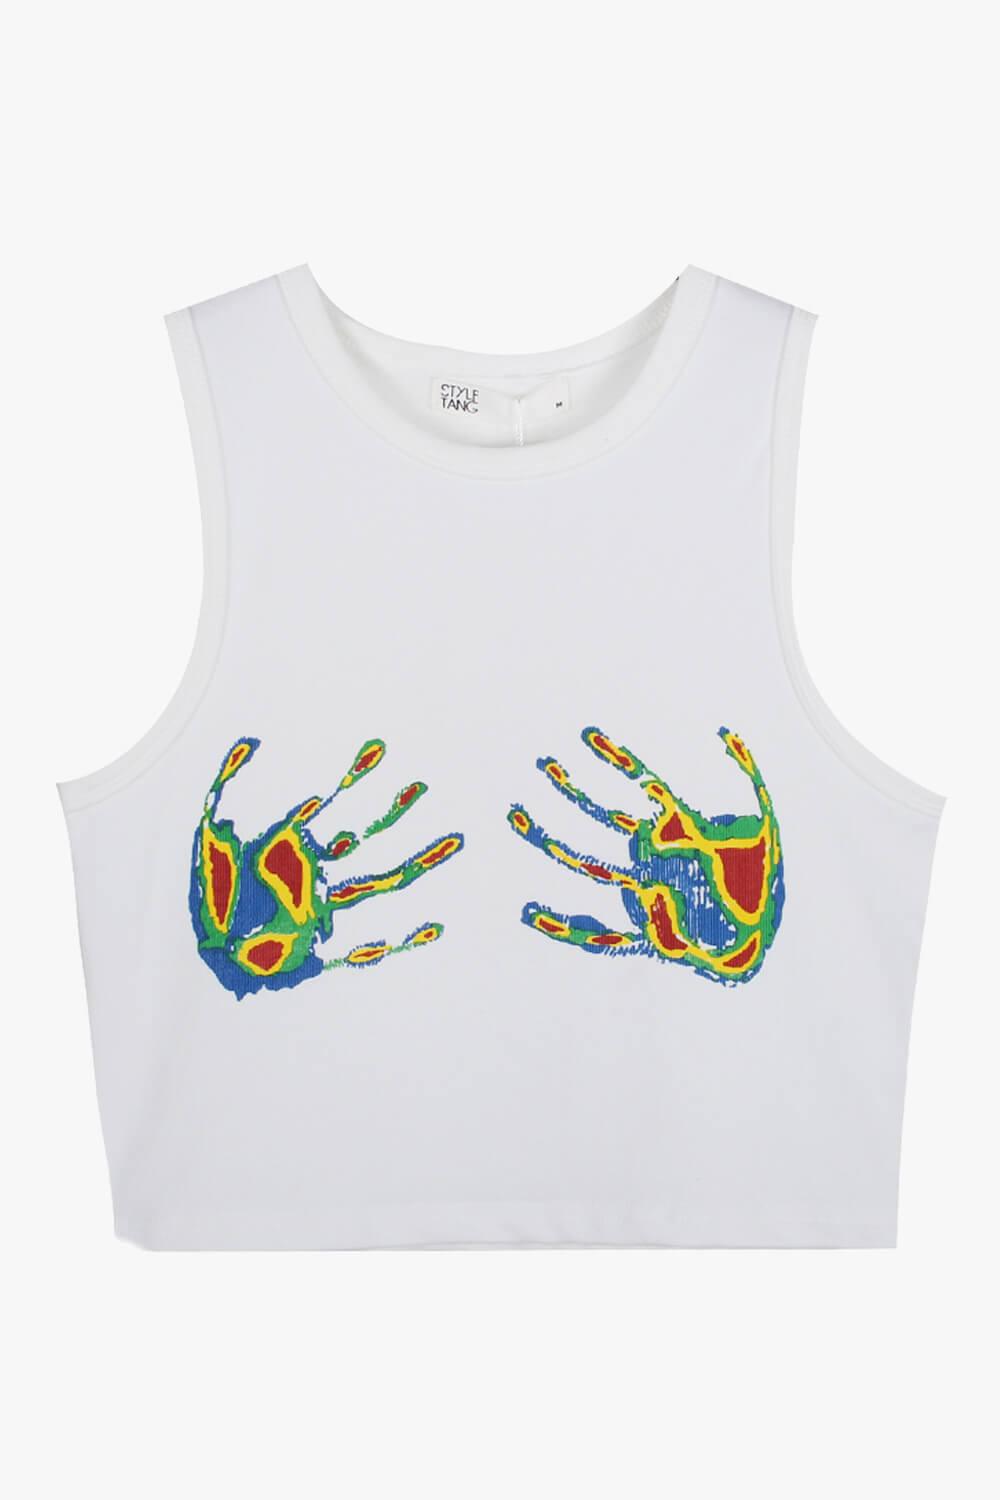 Thermal Hands Aesthetic Crop Top - Aesthetic Clothes Shop